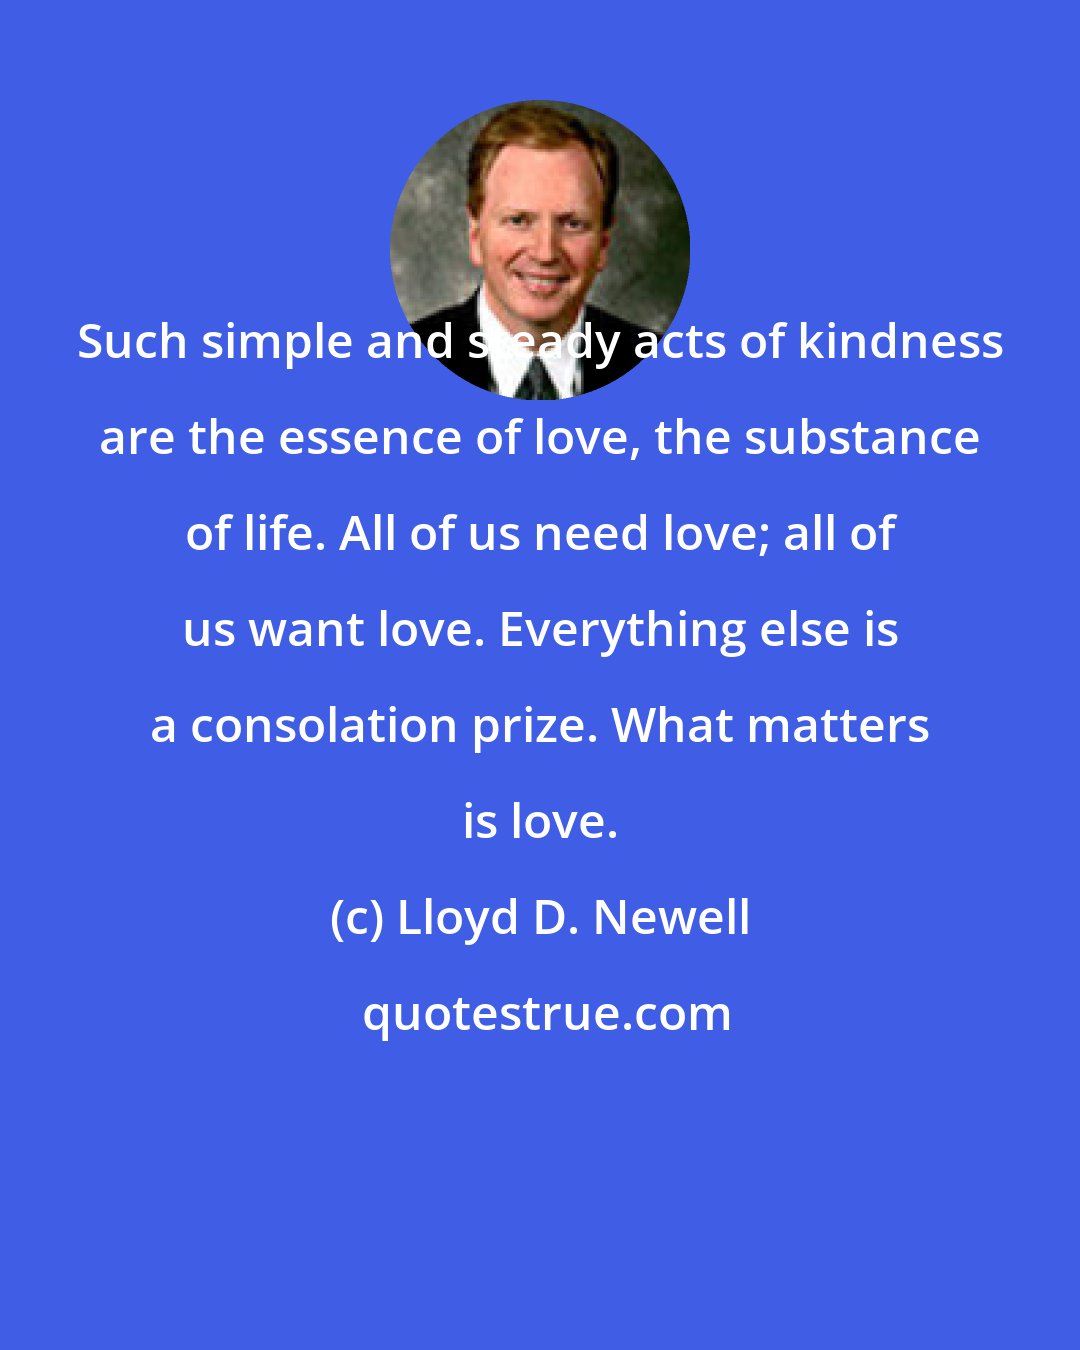 Lloyd D. Newell: Such simple and steady acts of kindness are the essence of love, the substance of life. All of us need love; all of us want love. Everything else is a consolation prize. What matters is love.